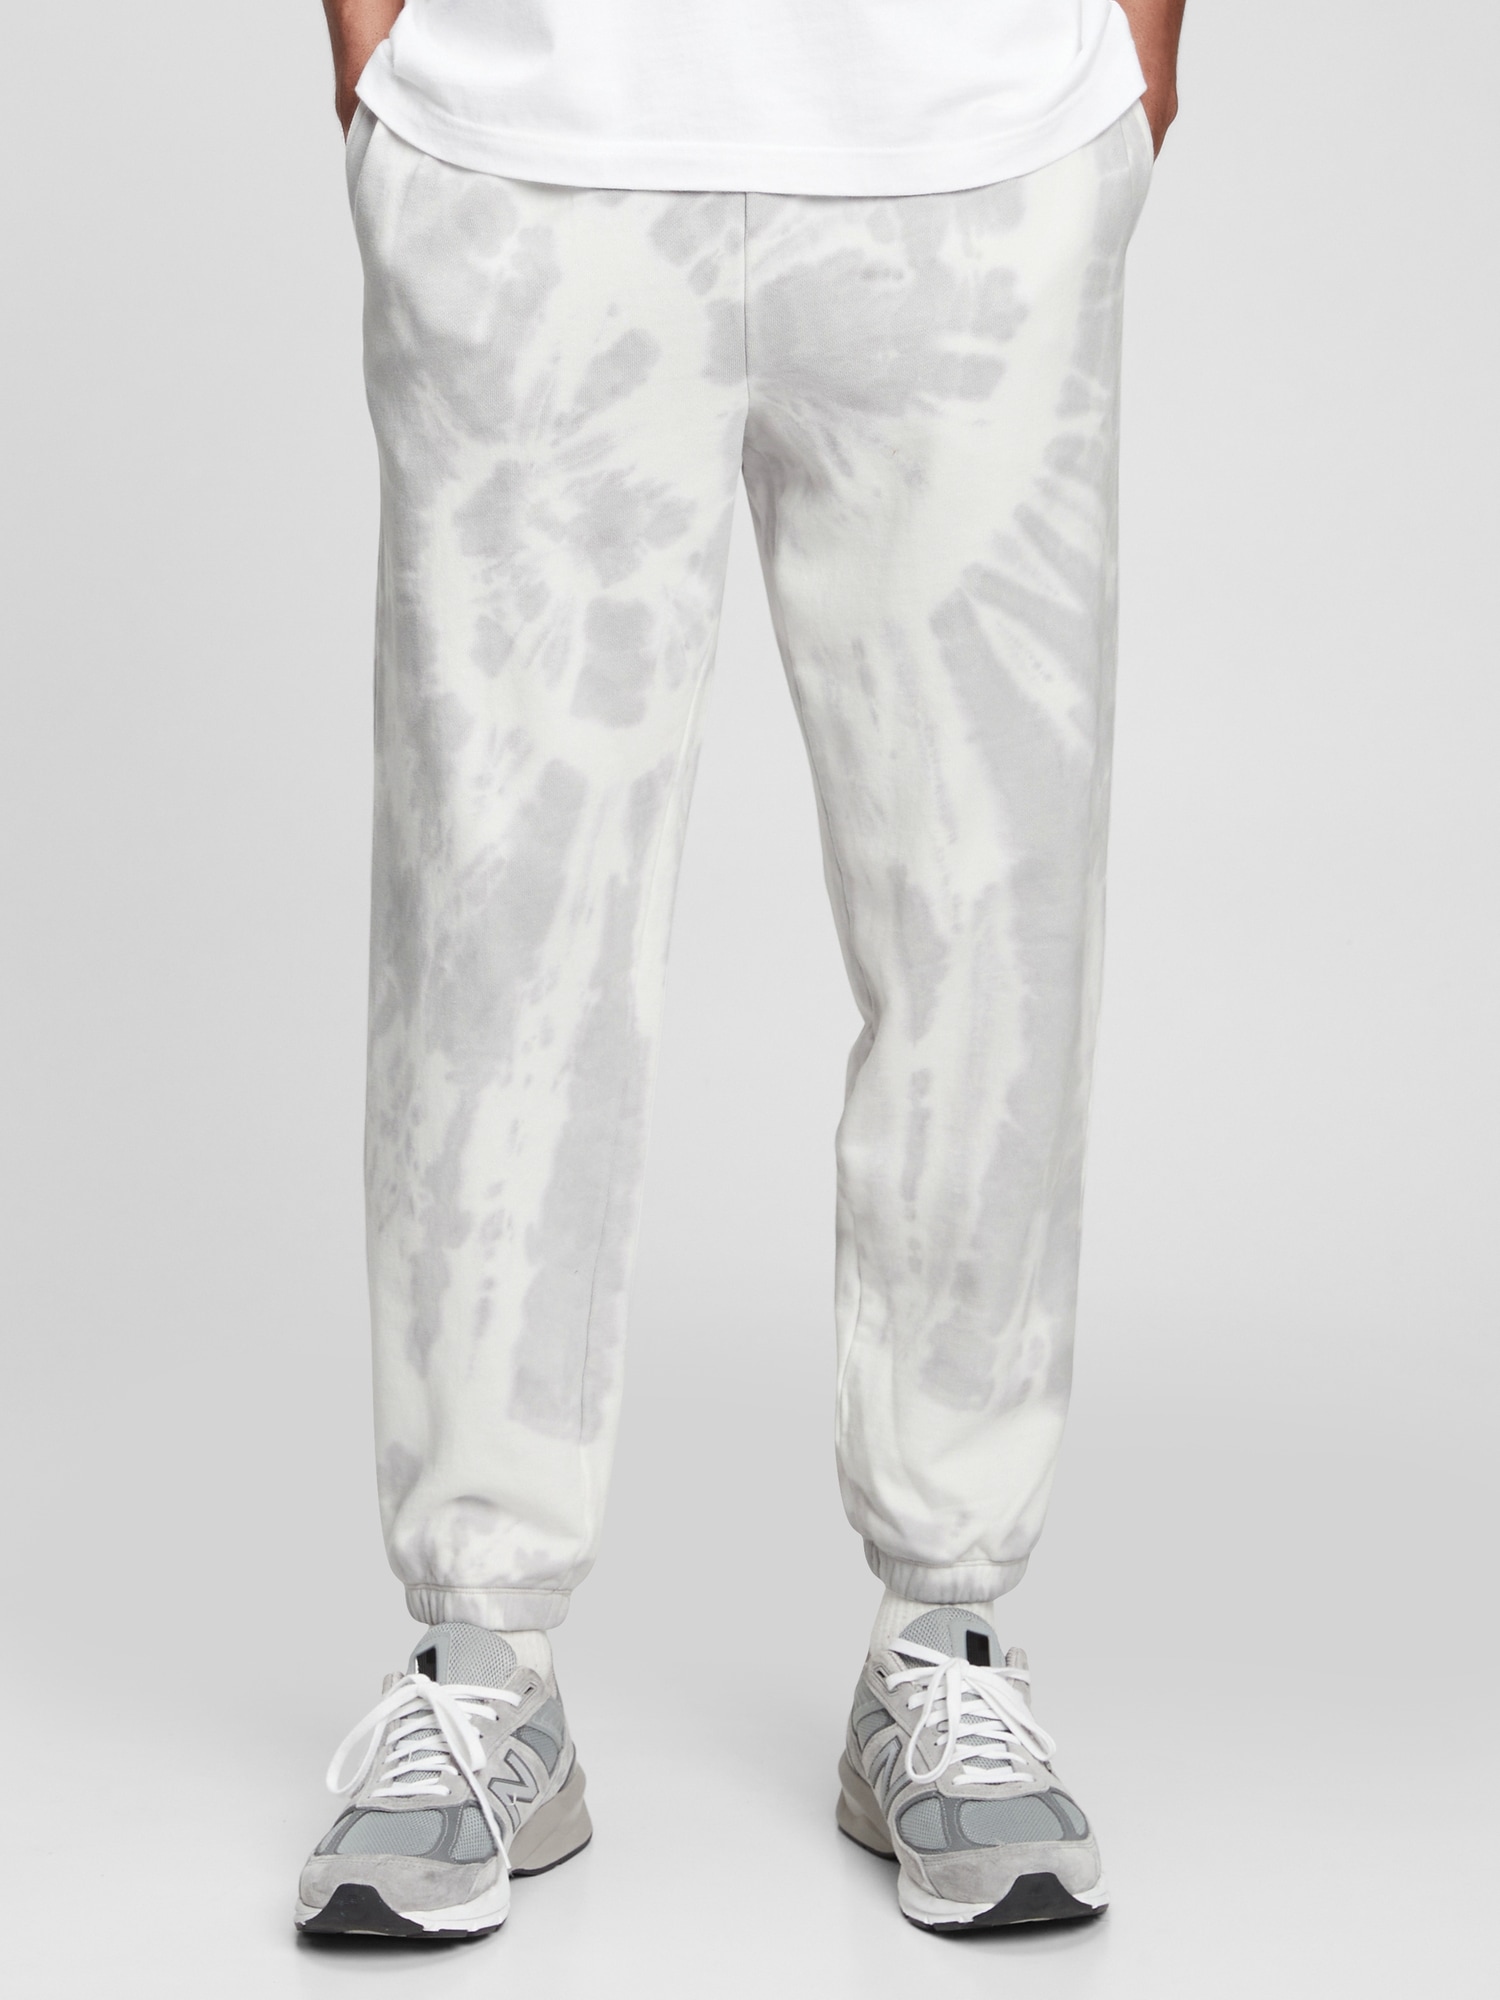 French Terry Tie-Dye Joggers | Gap